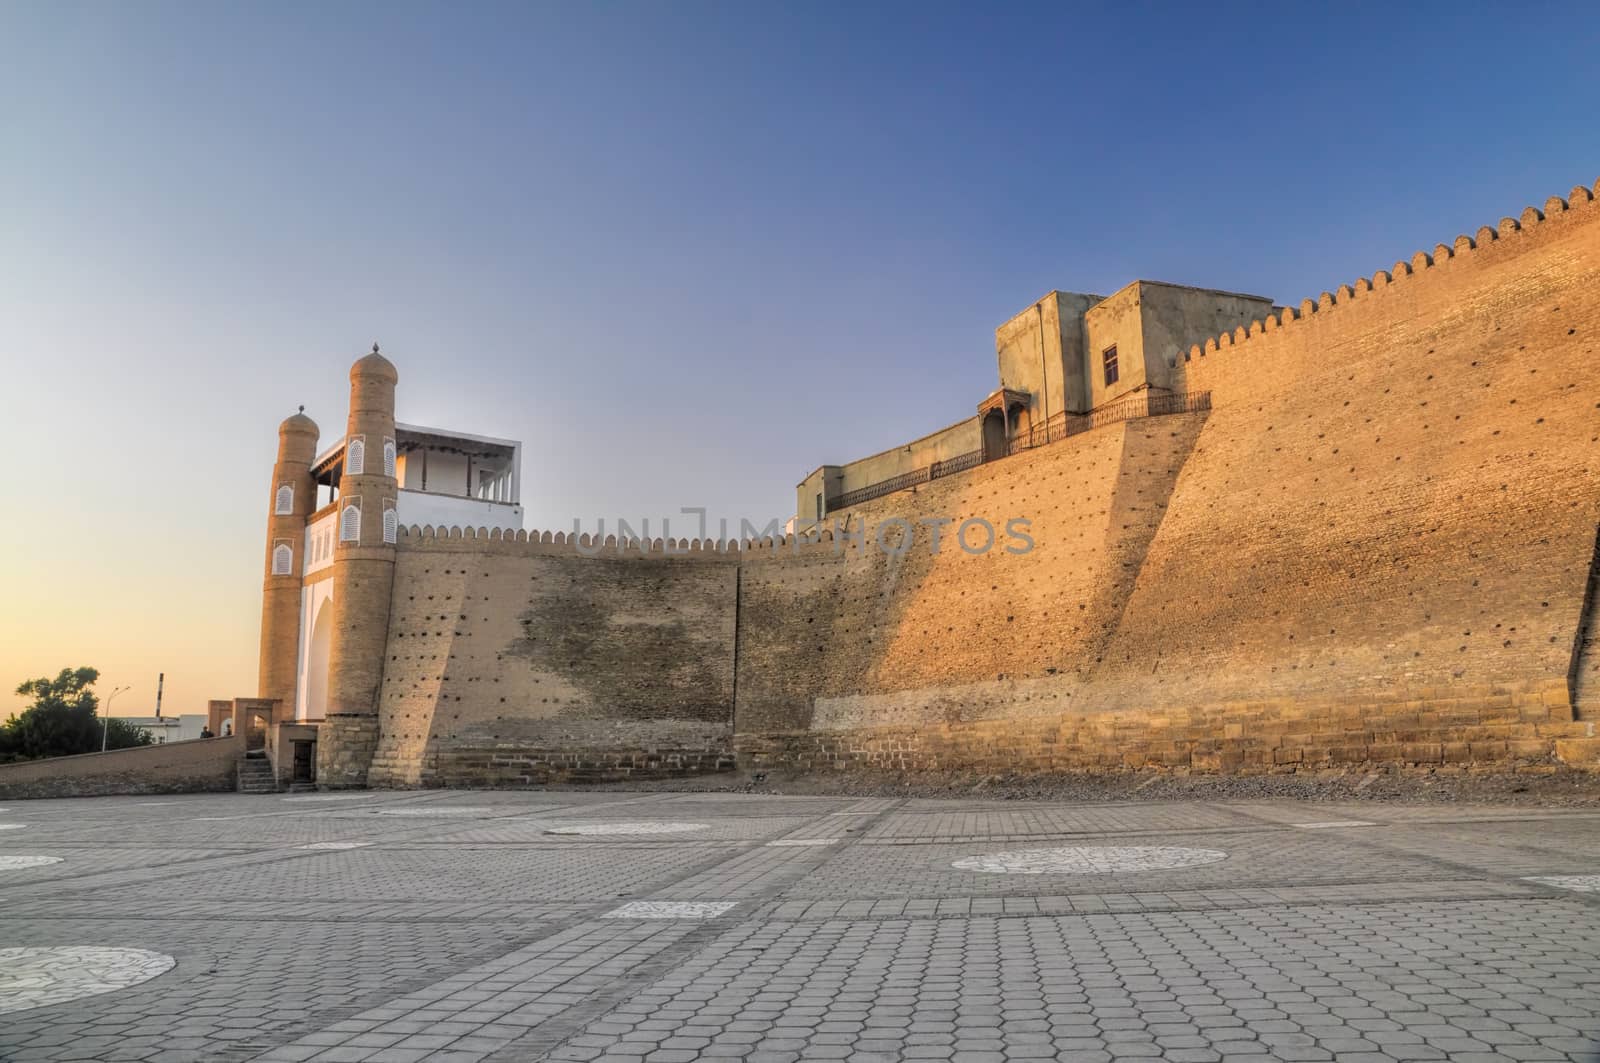 Picturesque view of city walls and gate in Bukhara, Uzbekistan